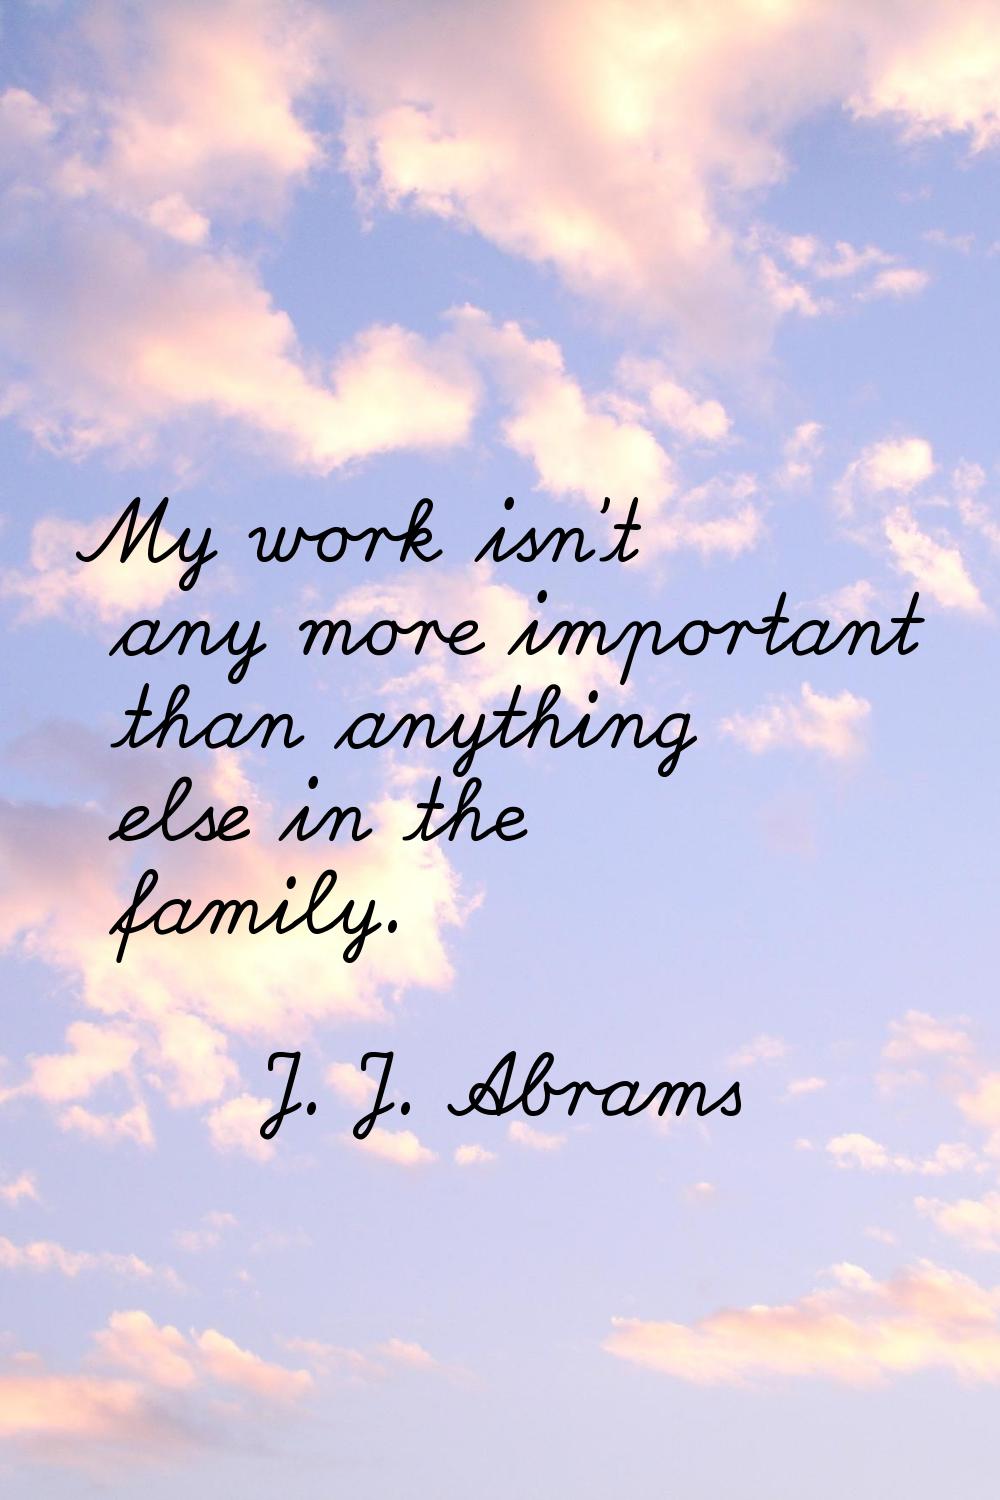 My work isn't any more important than anything else in the family.